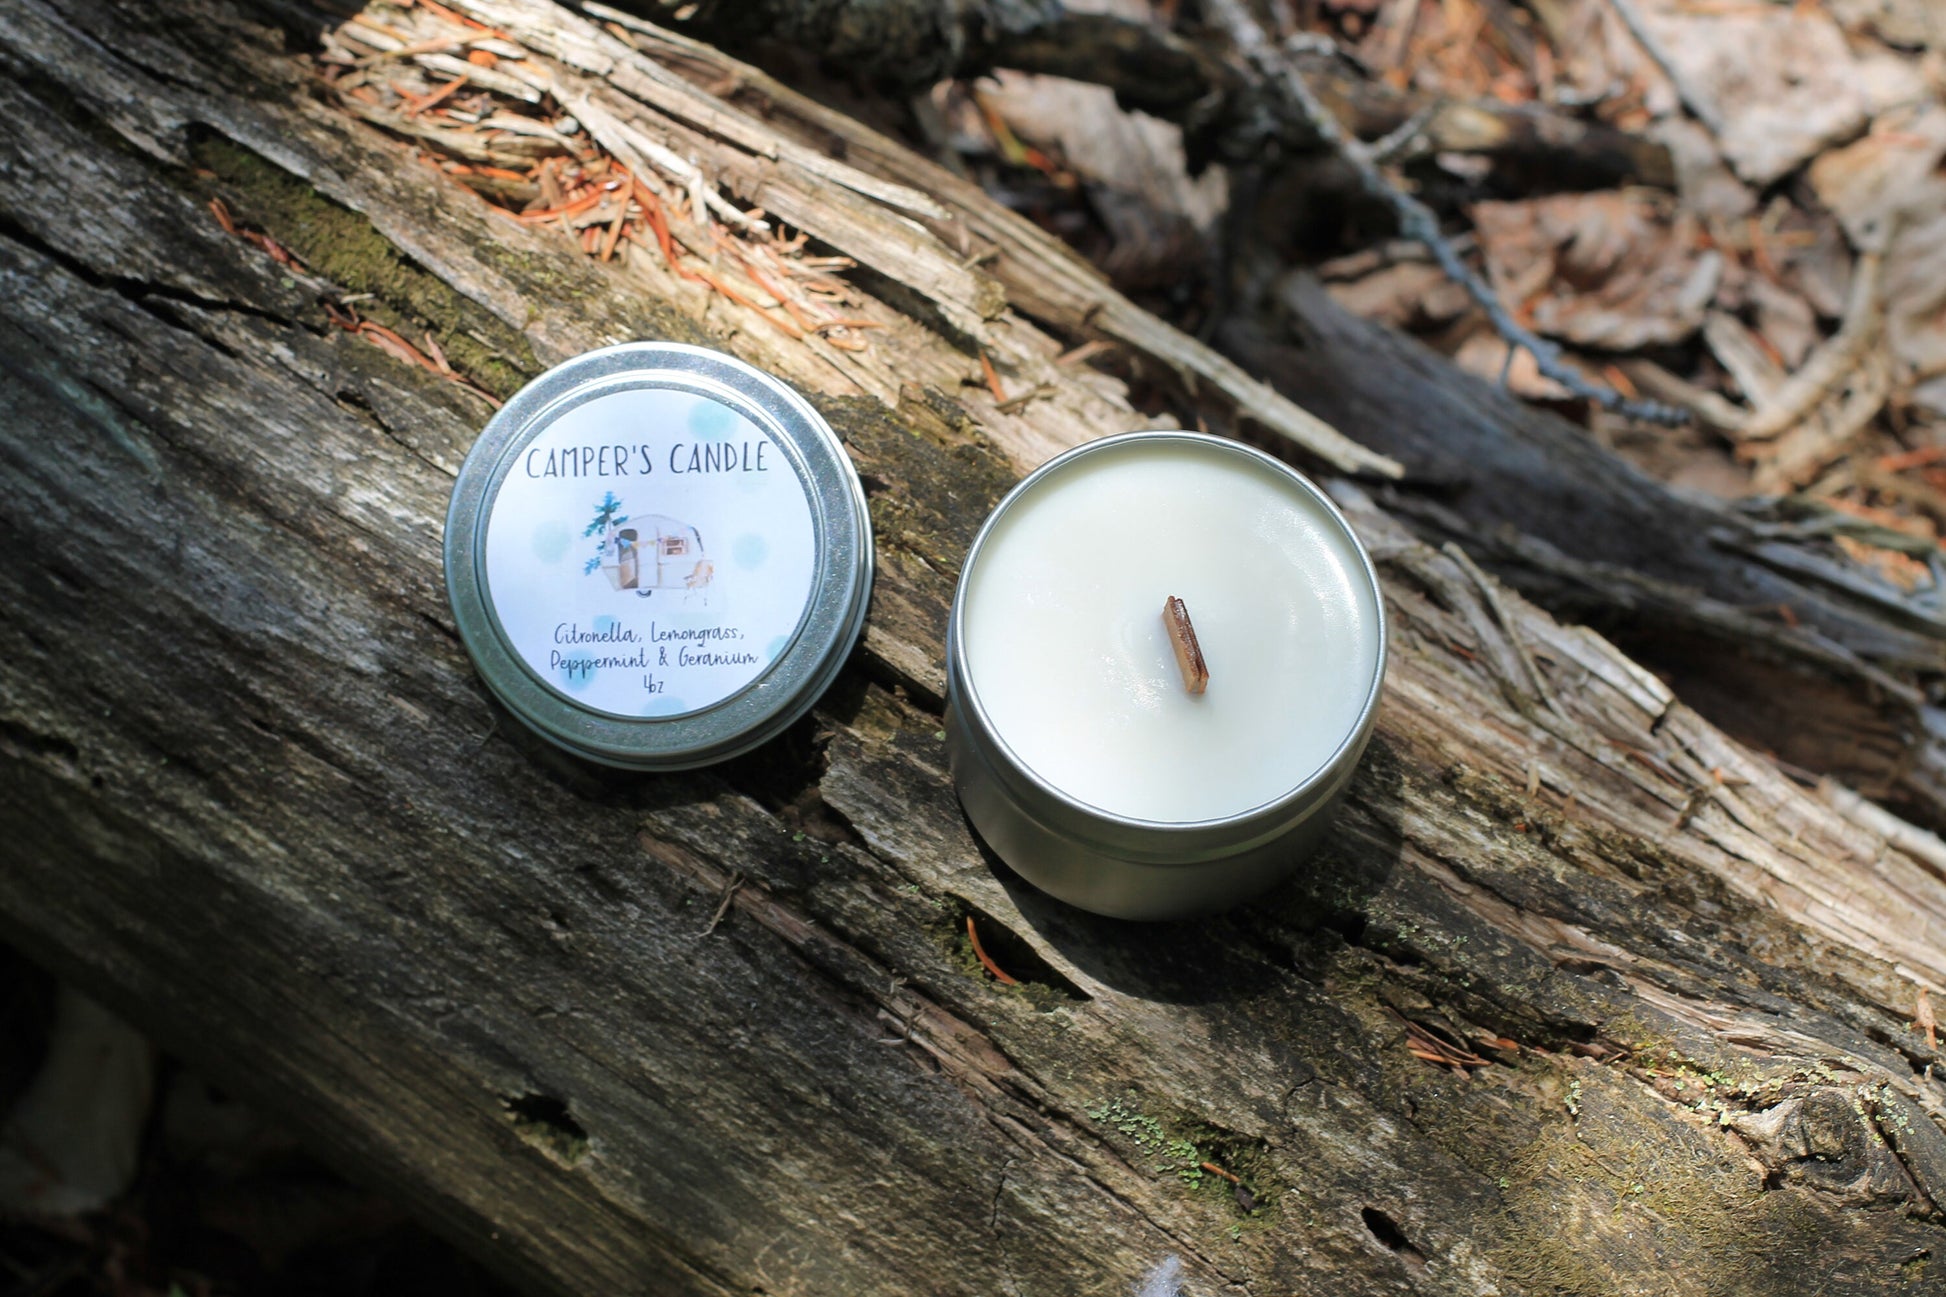 Camper Candle, Citronella Candle, Stop Bugging Me, Wood Wick Candle Tin, Vermont Travel Candle